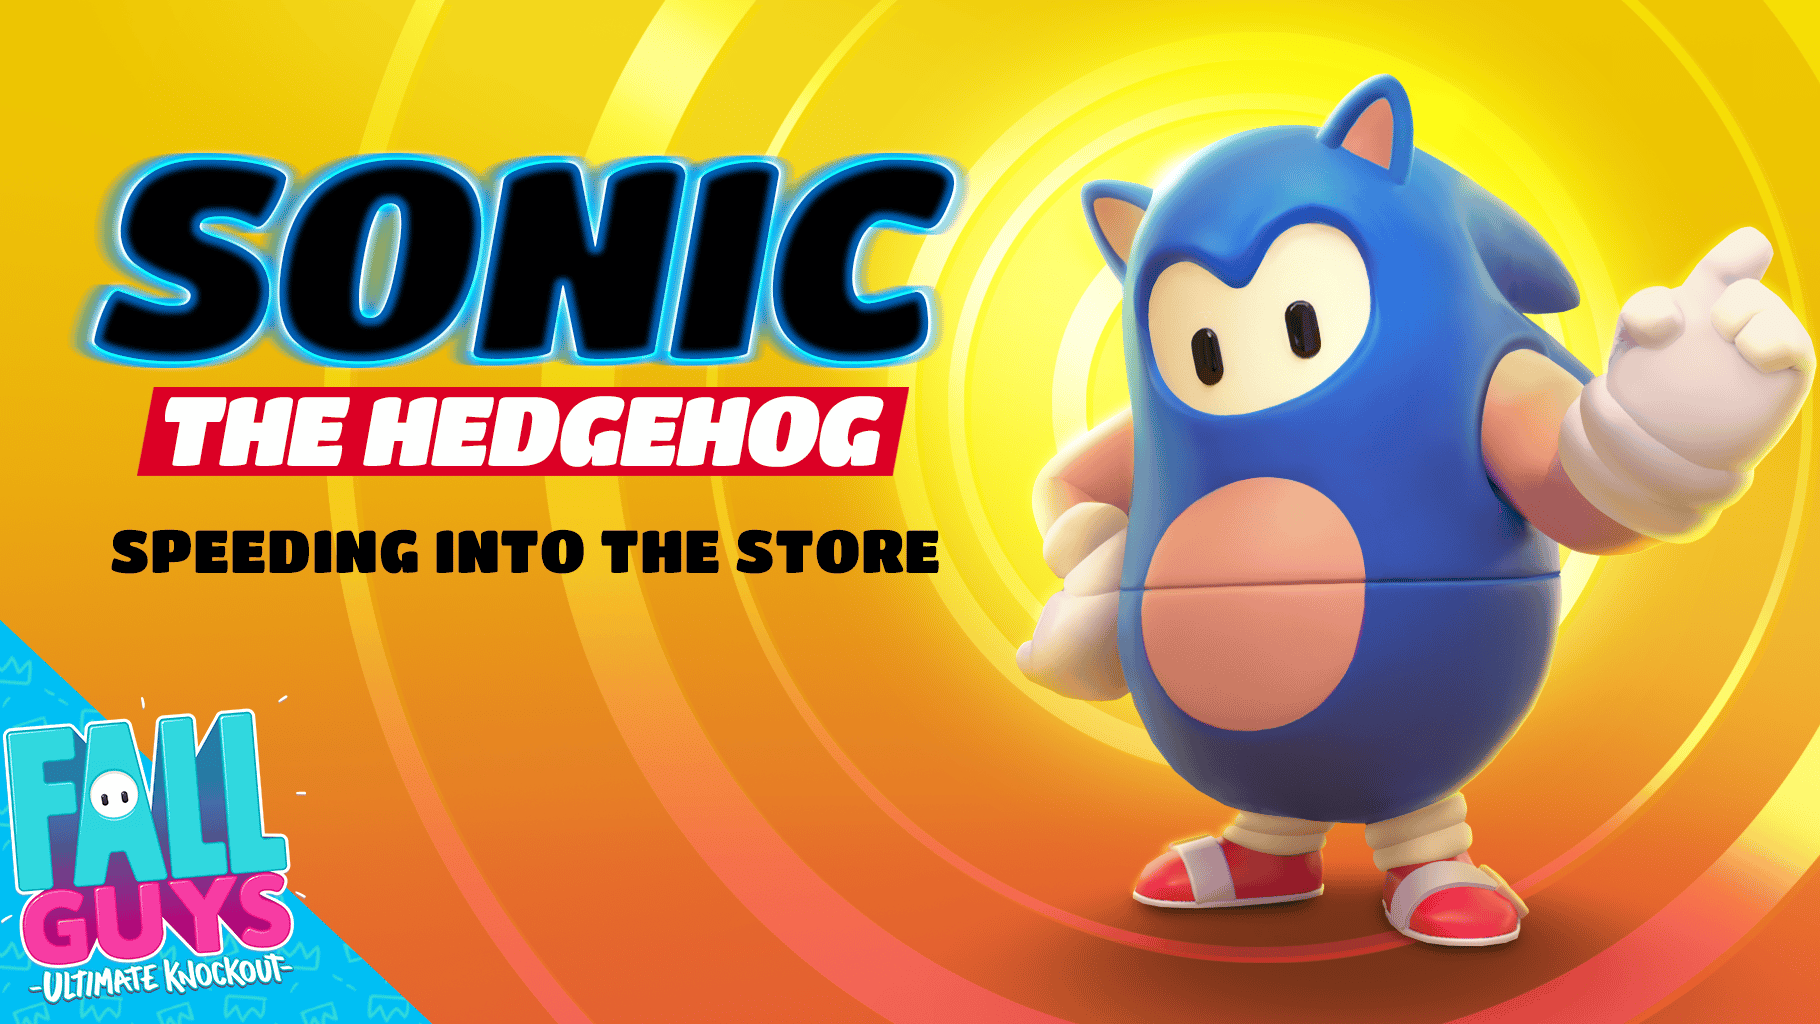 Sonic the Hedgehog Fall Guys Official Promo